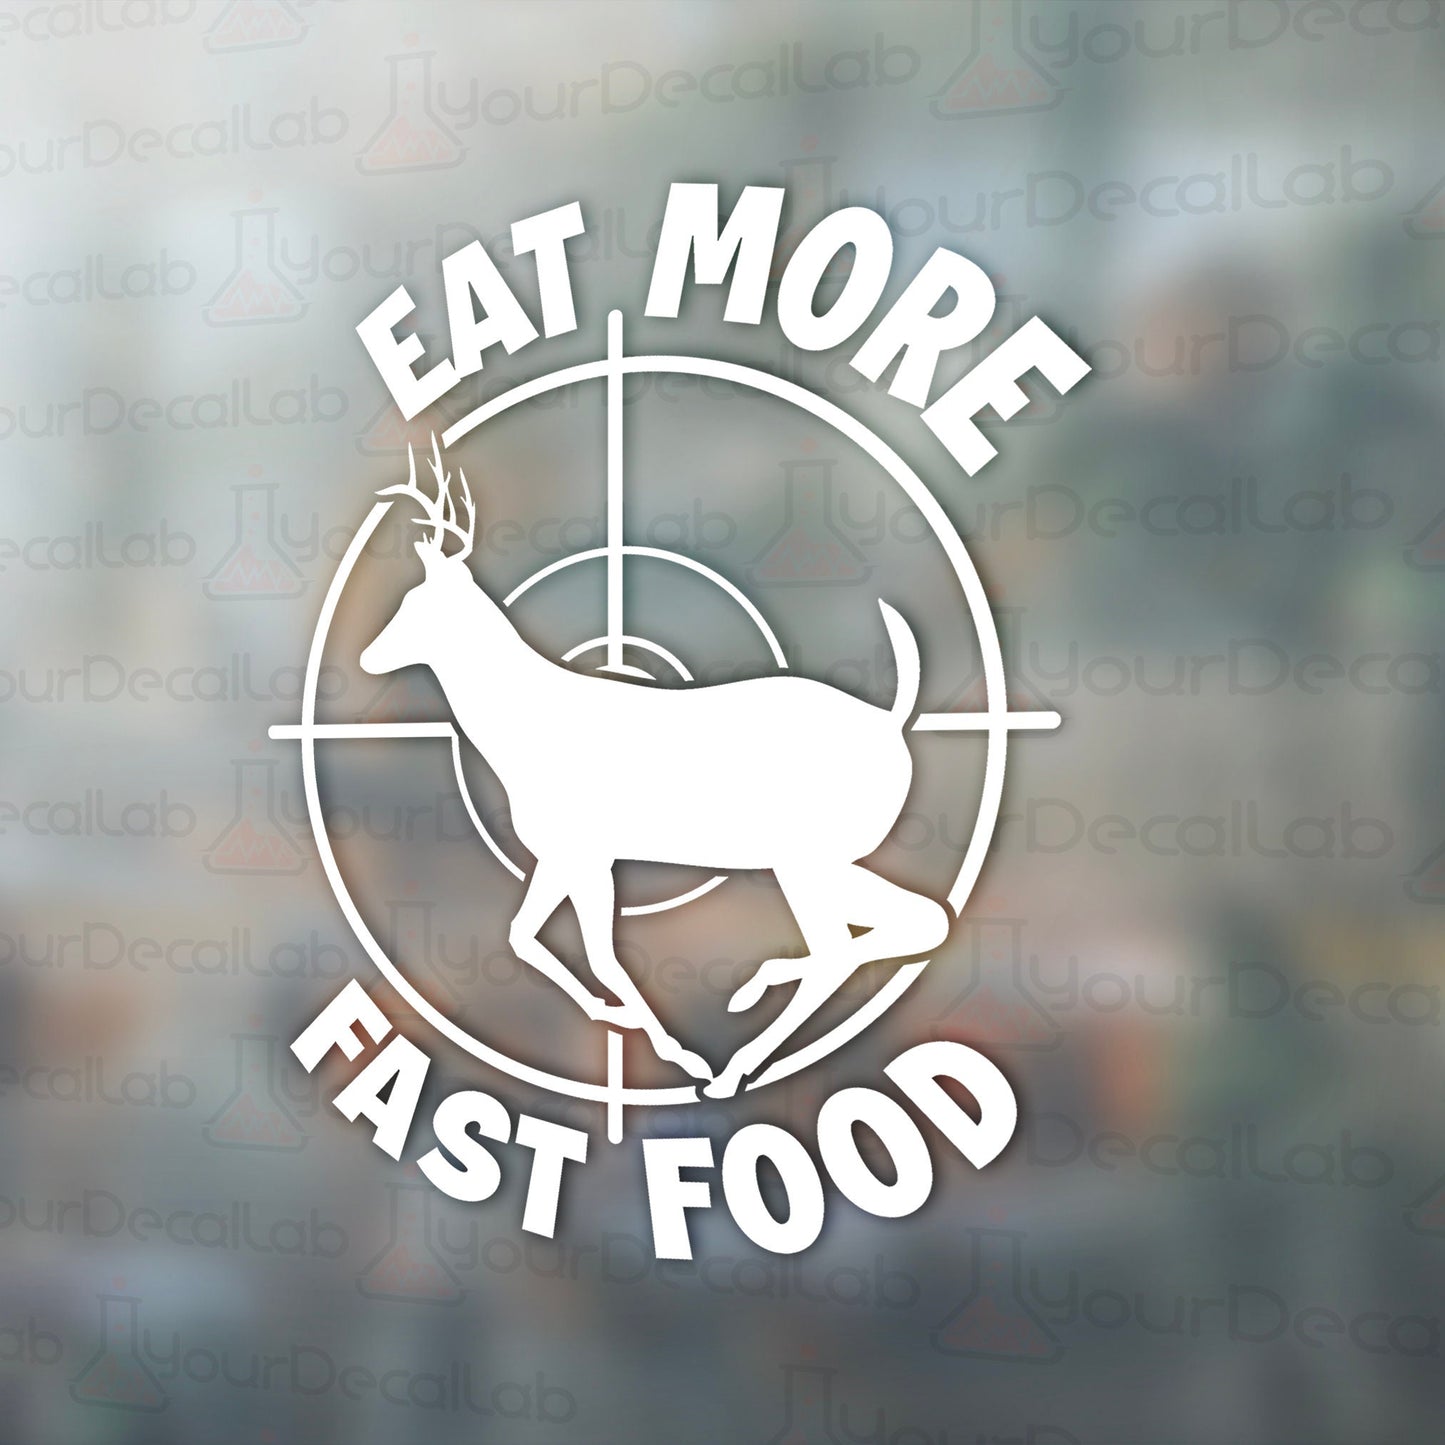 a sticker that says eat more fast food